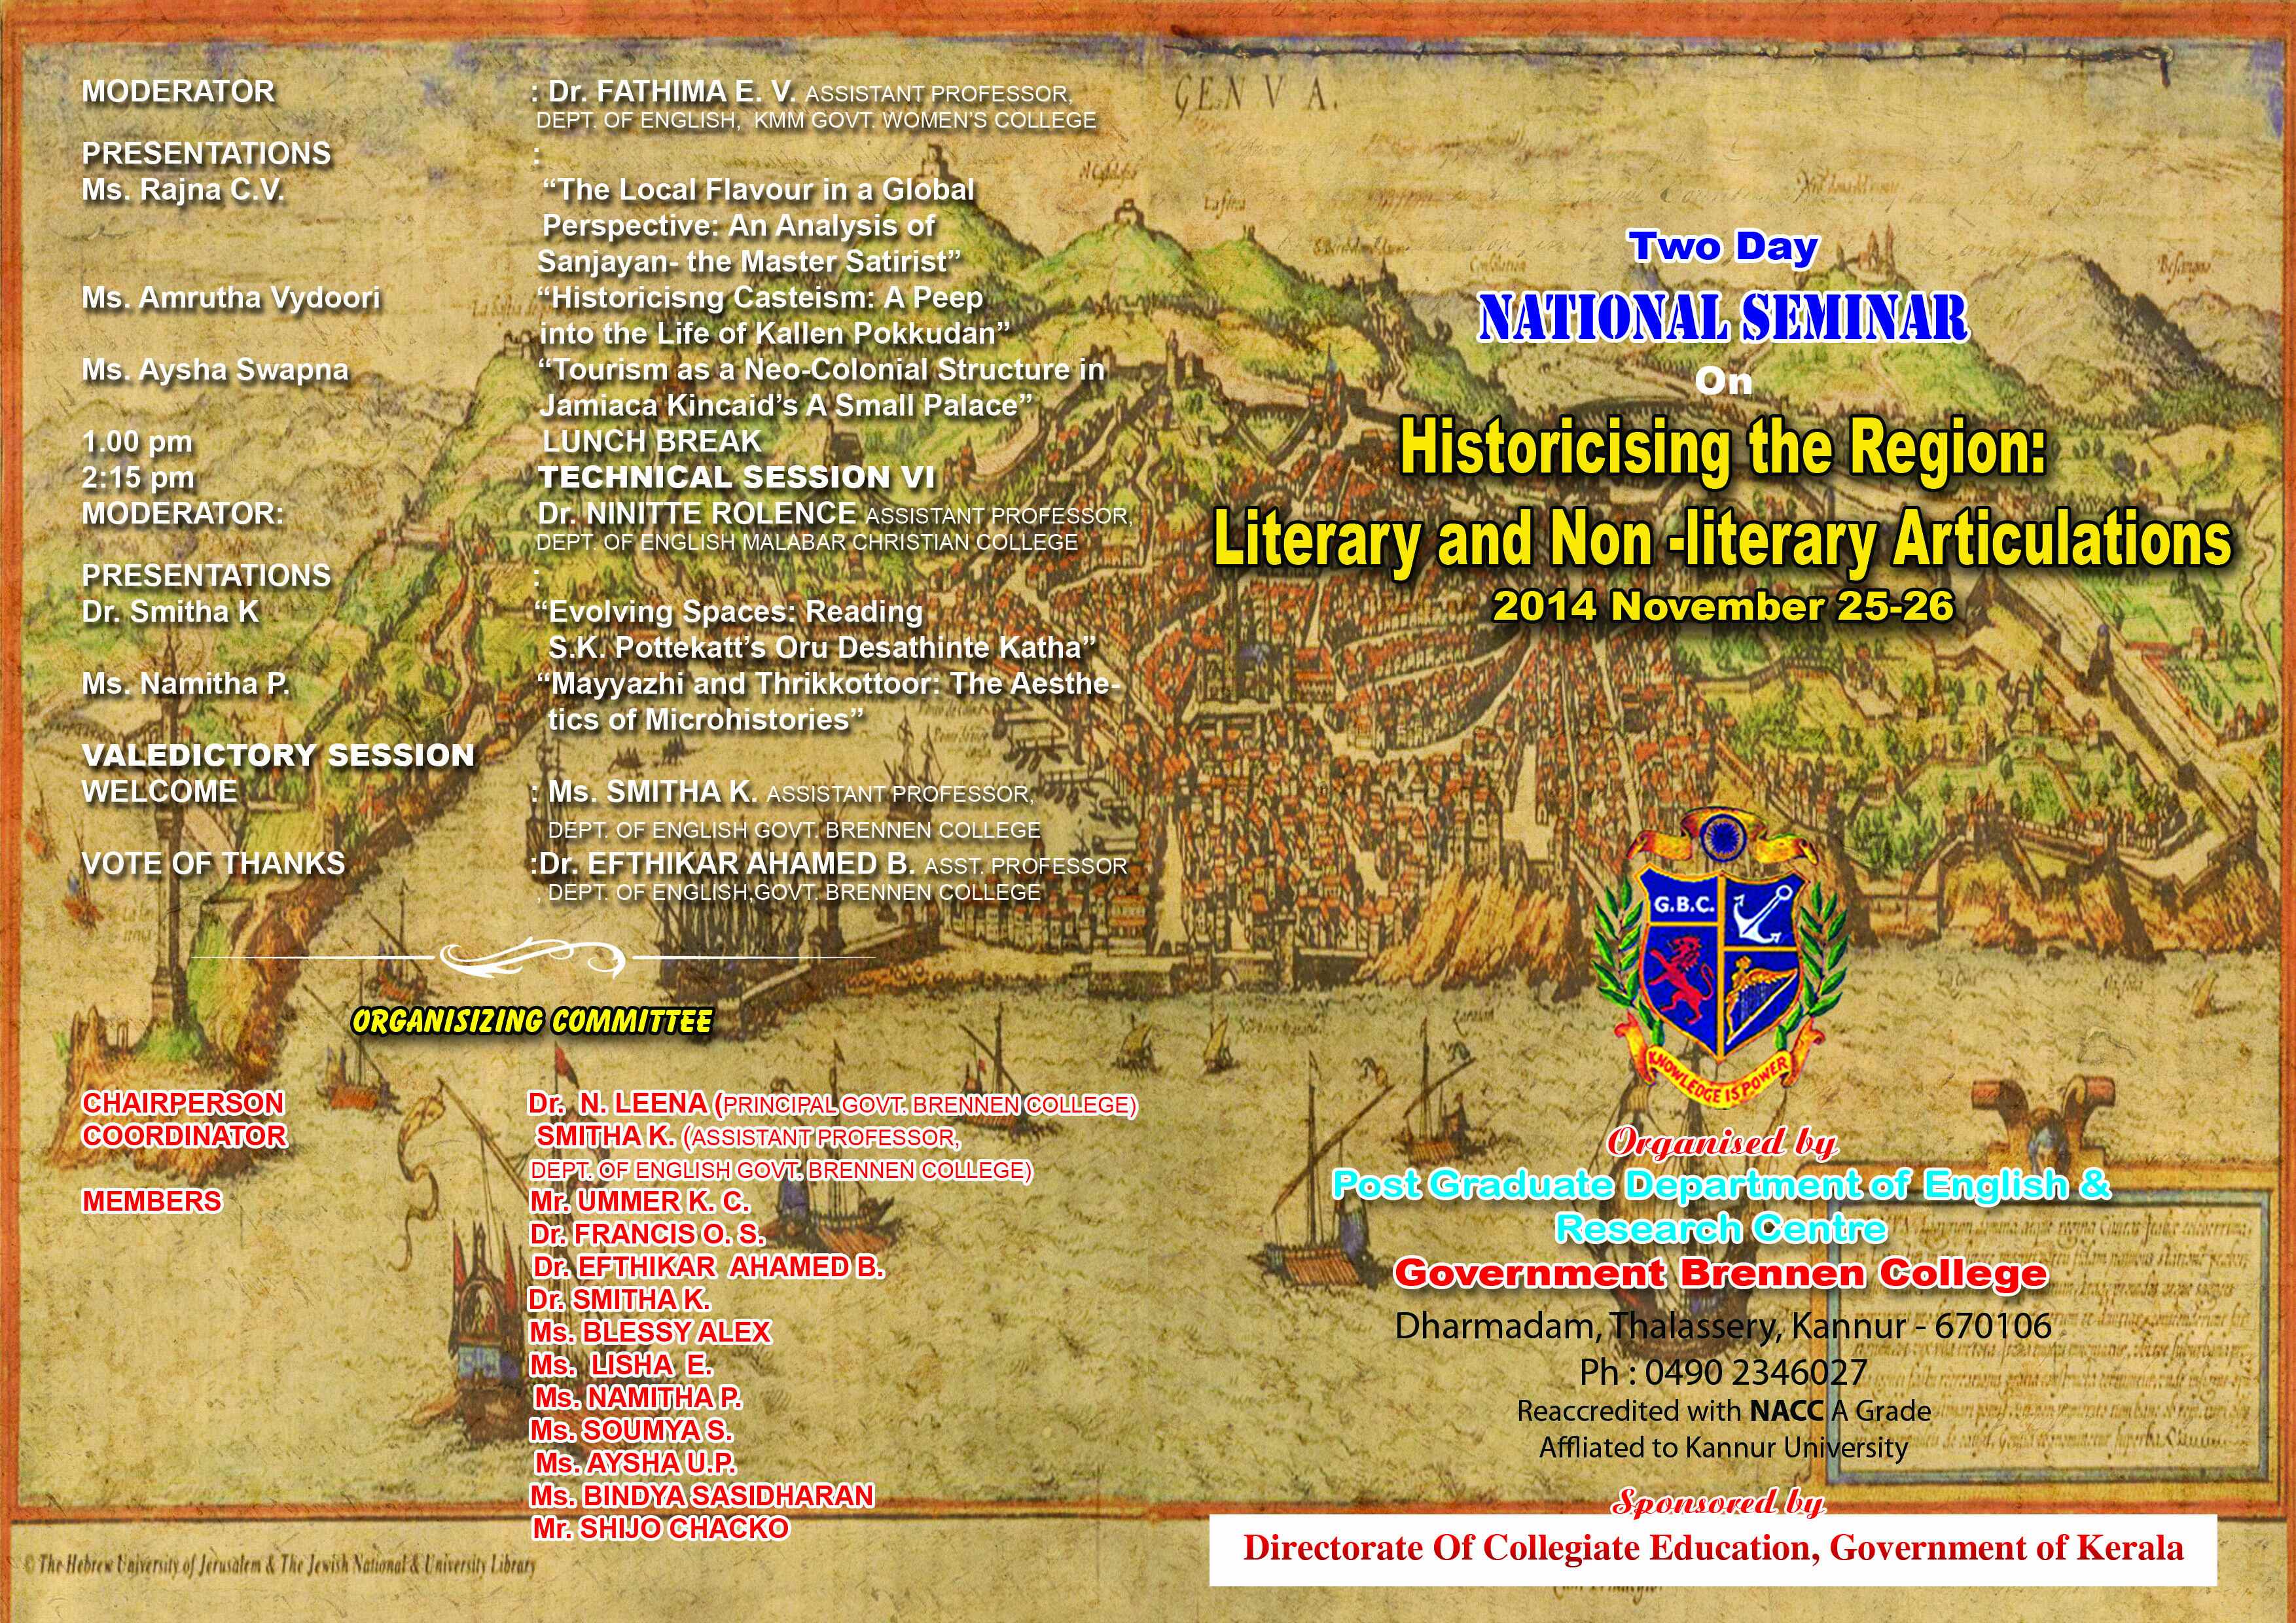 TWO DAY NATIONAL SEMINAR ON HISTORICISING THE REGION: LITERARY AND NON LITERARY ARTICULATIONS